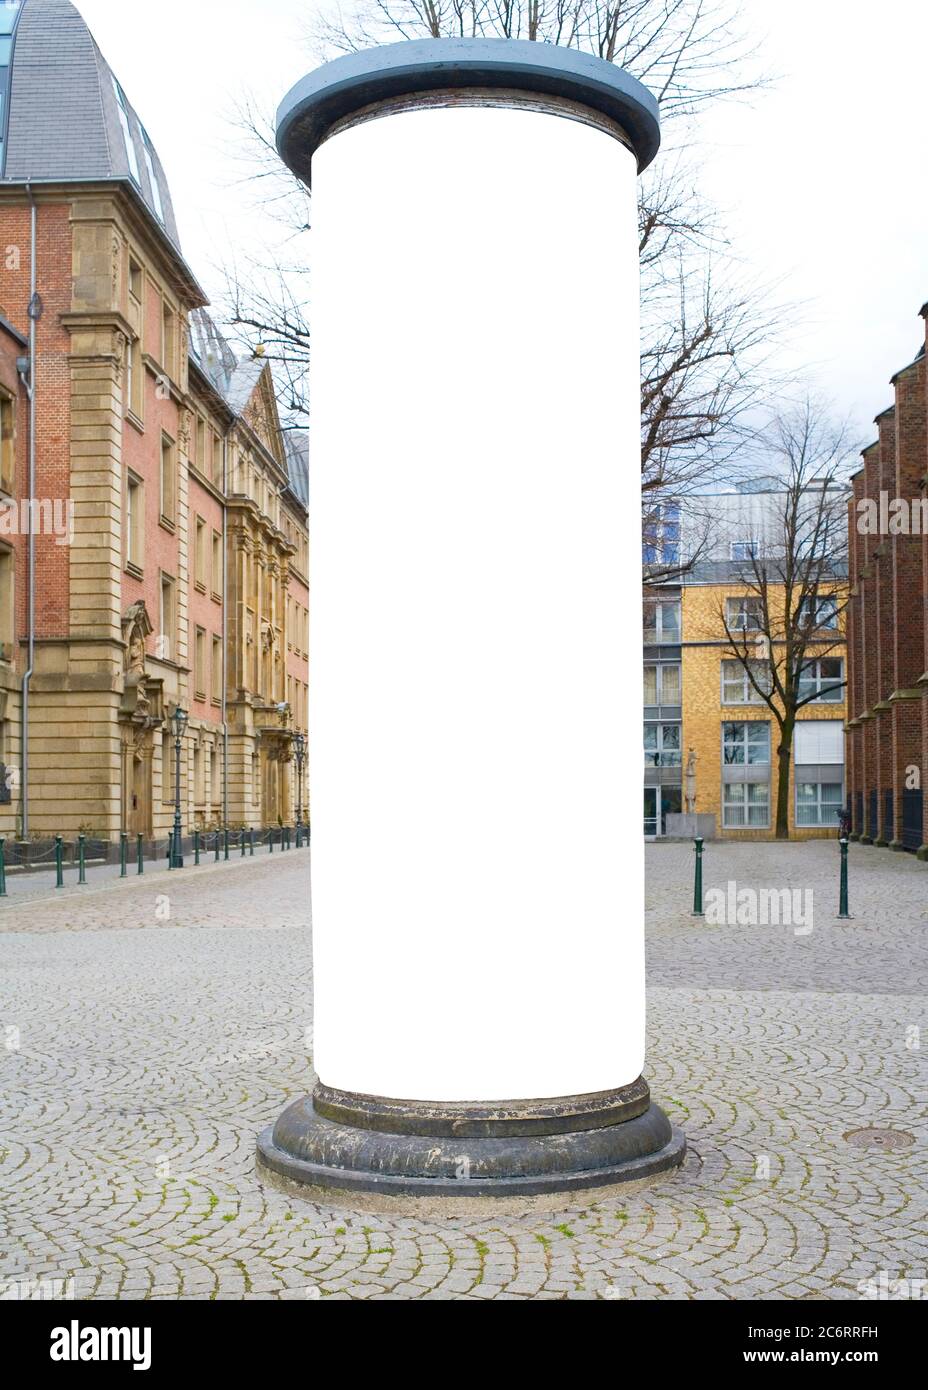 advertising pillar in a city with free copy space Stock Photo